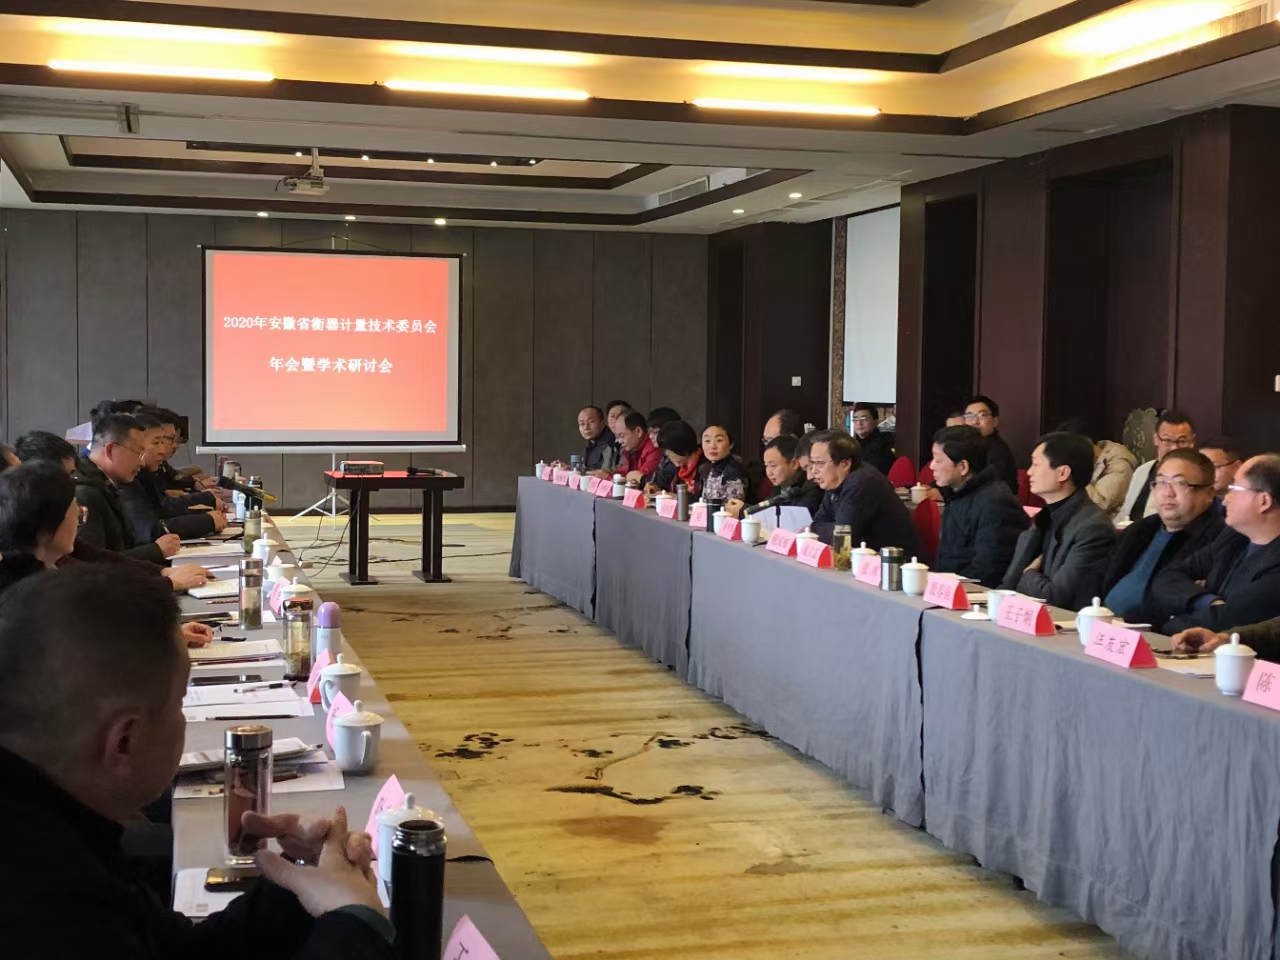 Annual meeting and academic seminar of Anhui Technical Committee of Weighing Apparatus